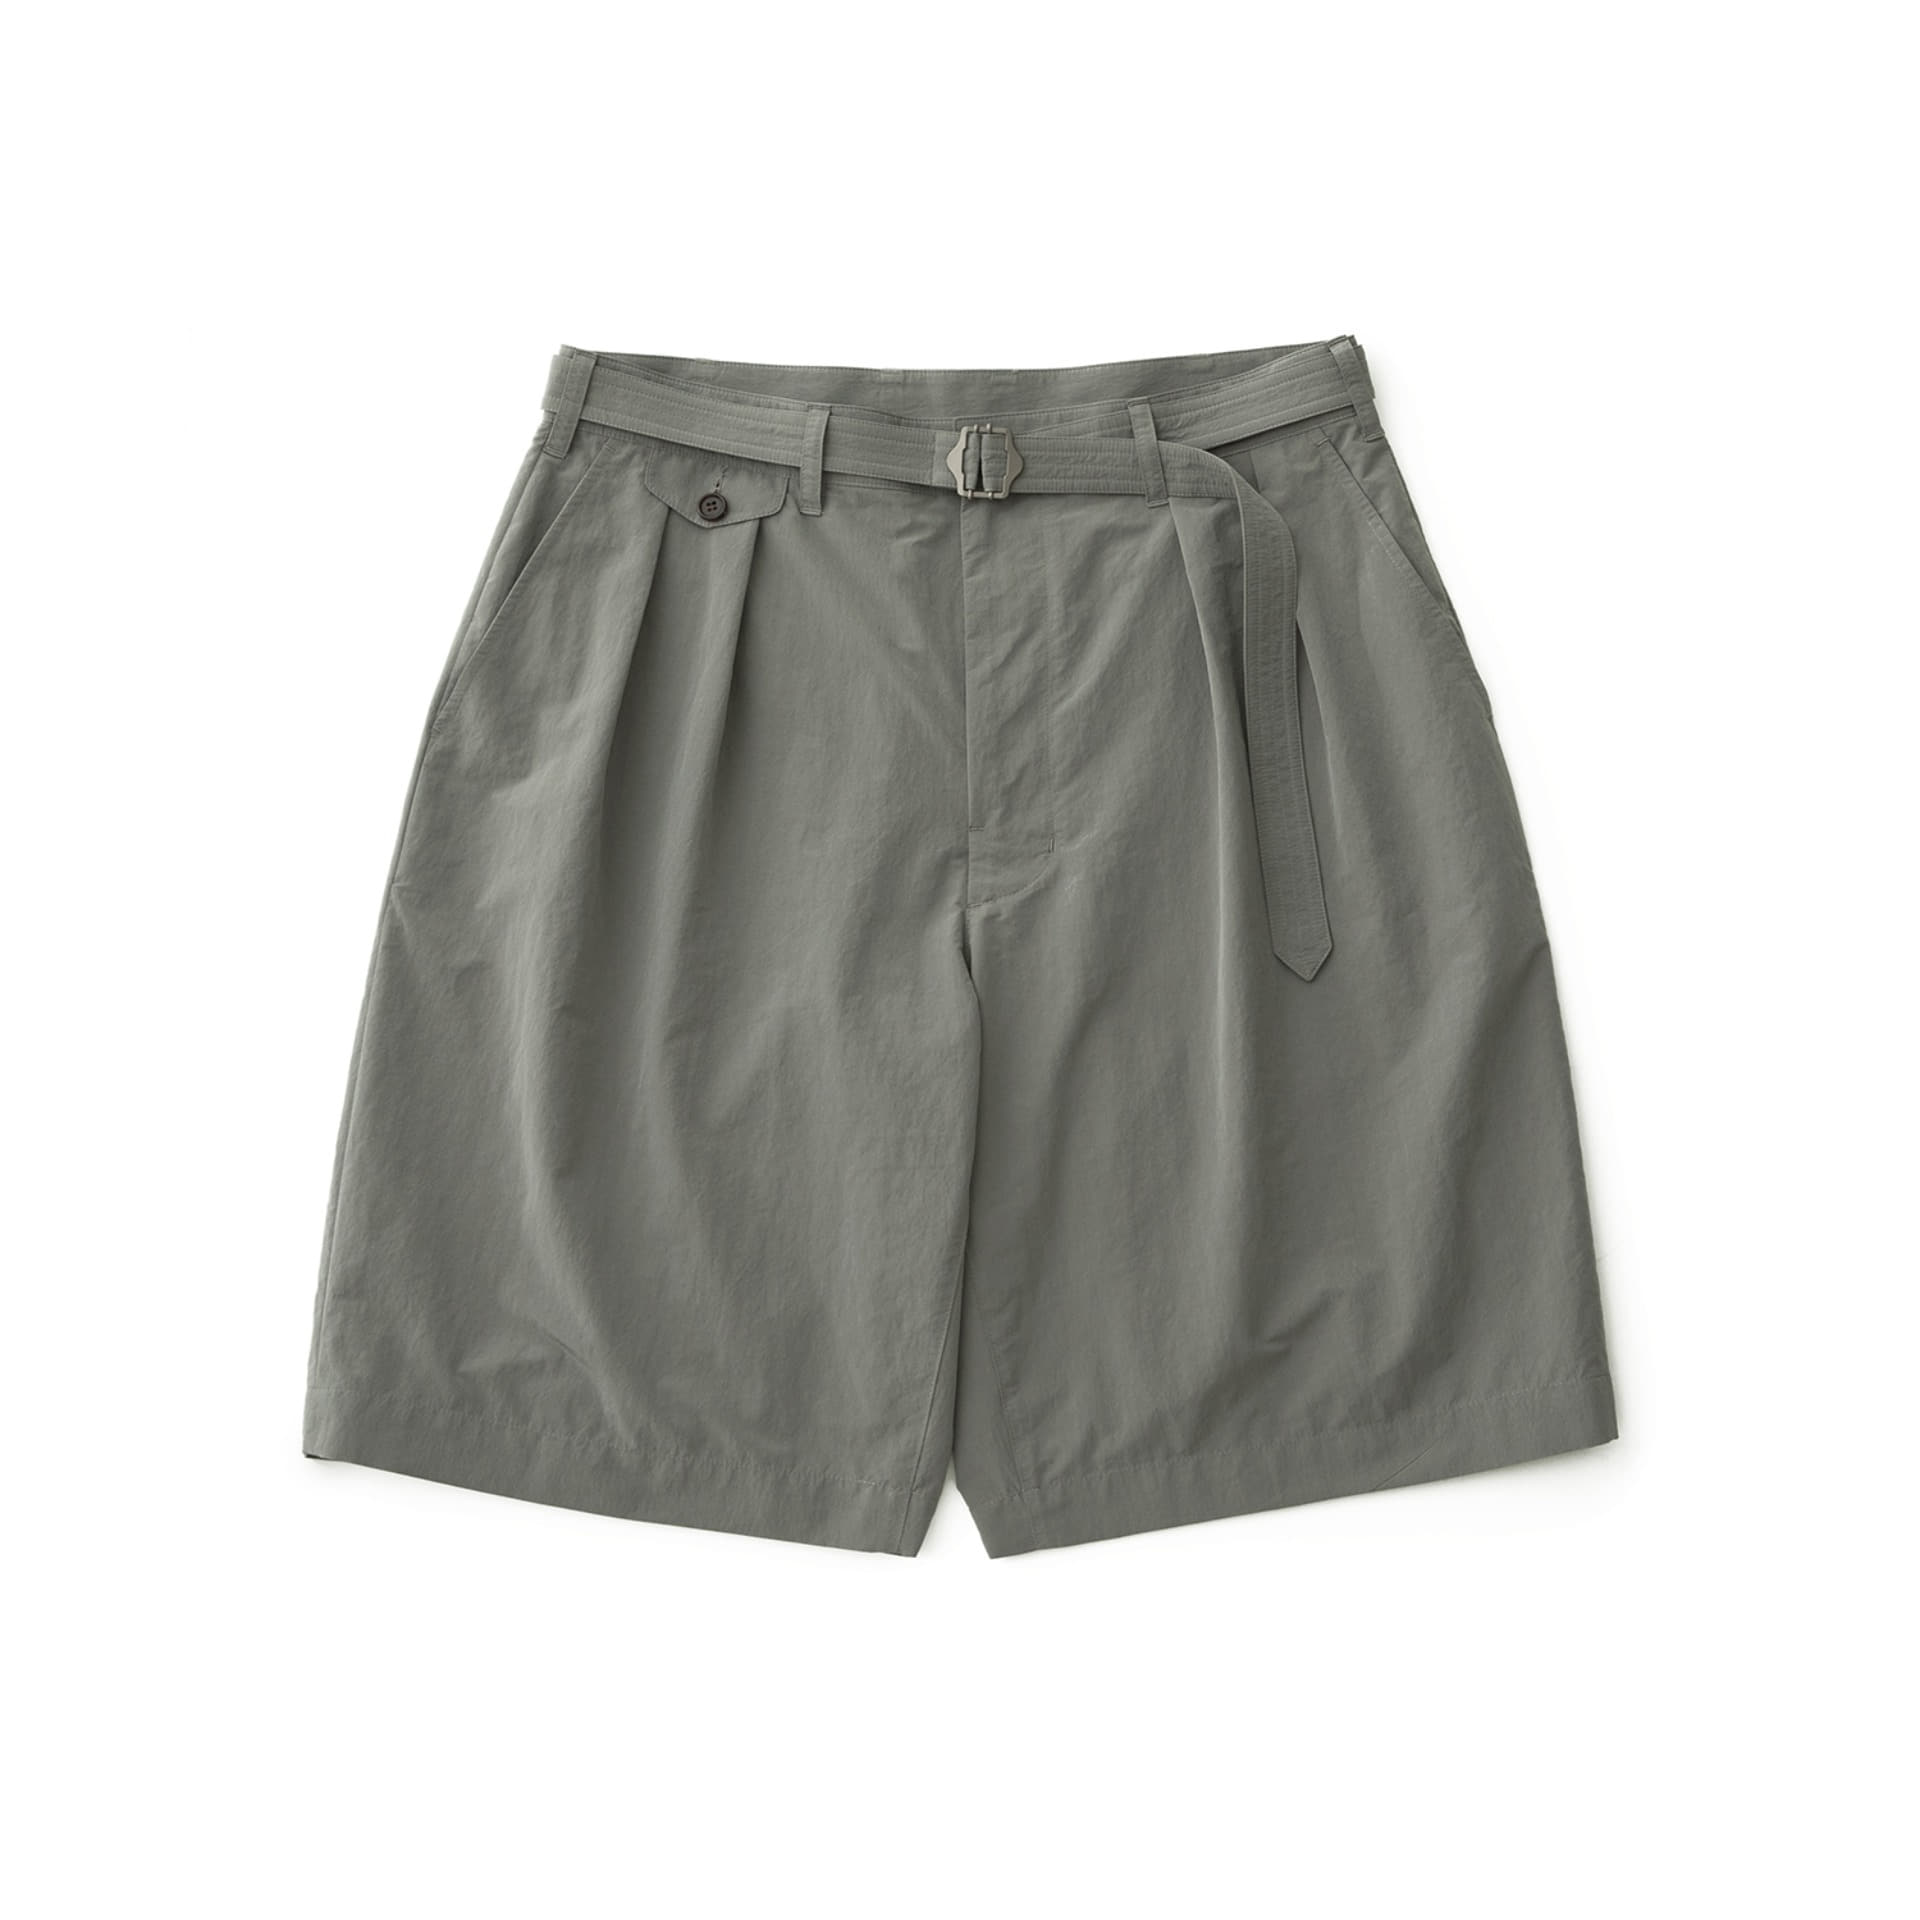 A/O 21SS Hemingway Belted Shorts (Cement Gray)